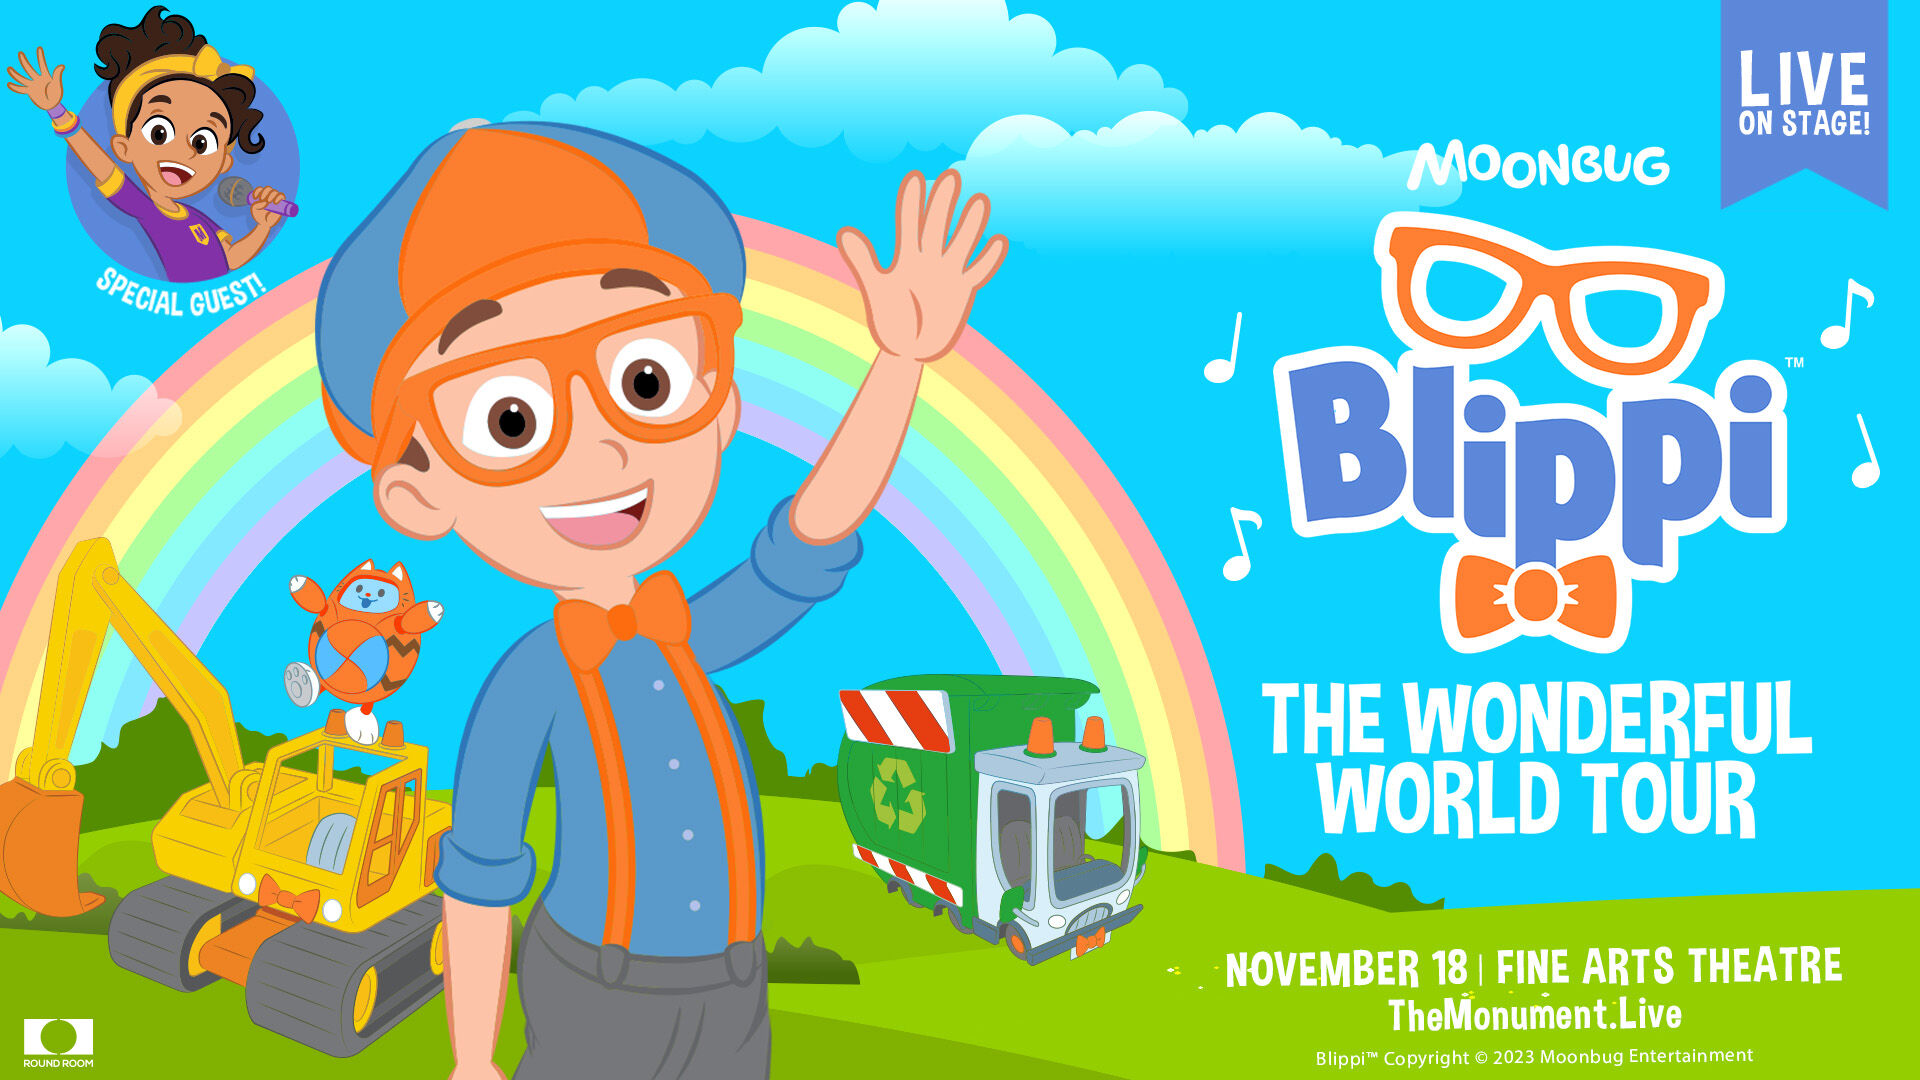 Blippi The Wonderful World Tour is an adventure for the whole family and its coming to Rapid City! Lifestyle newscenter1